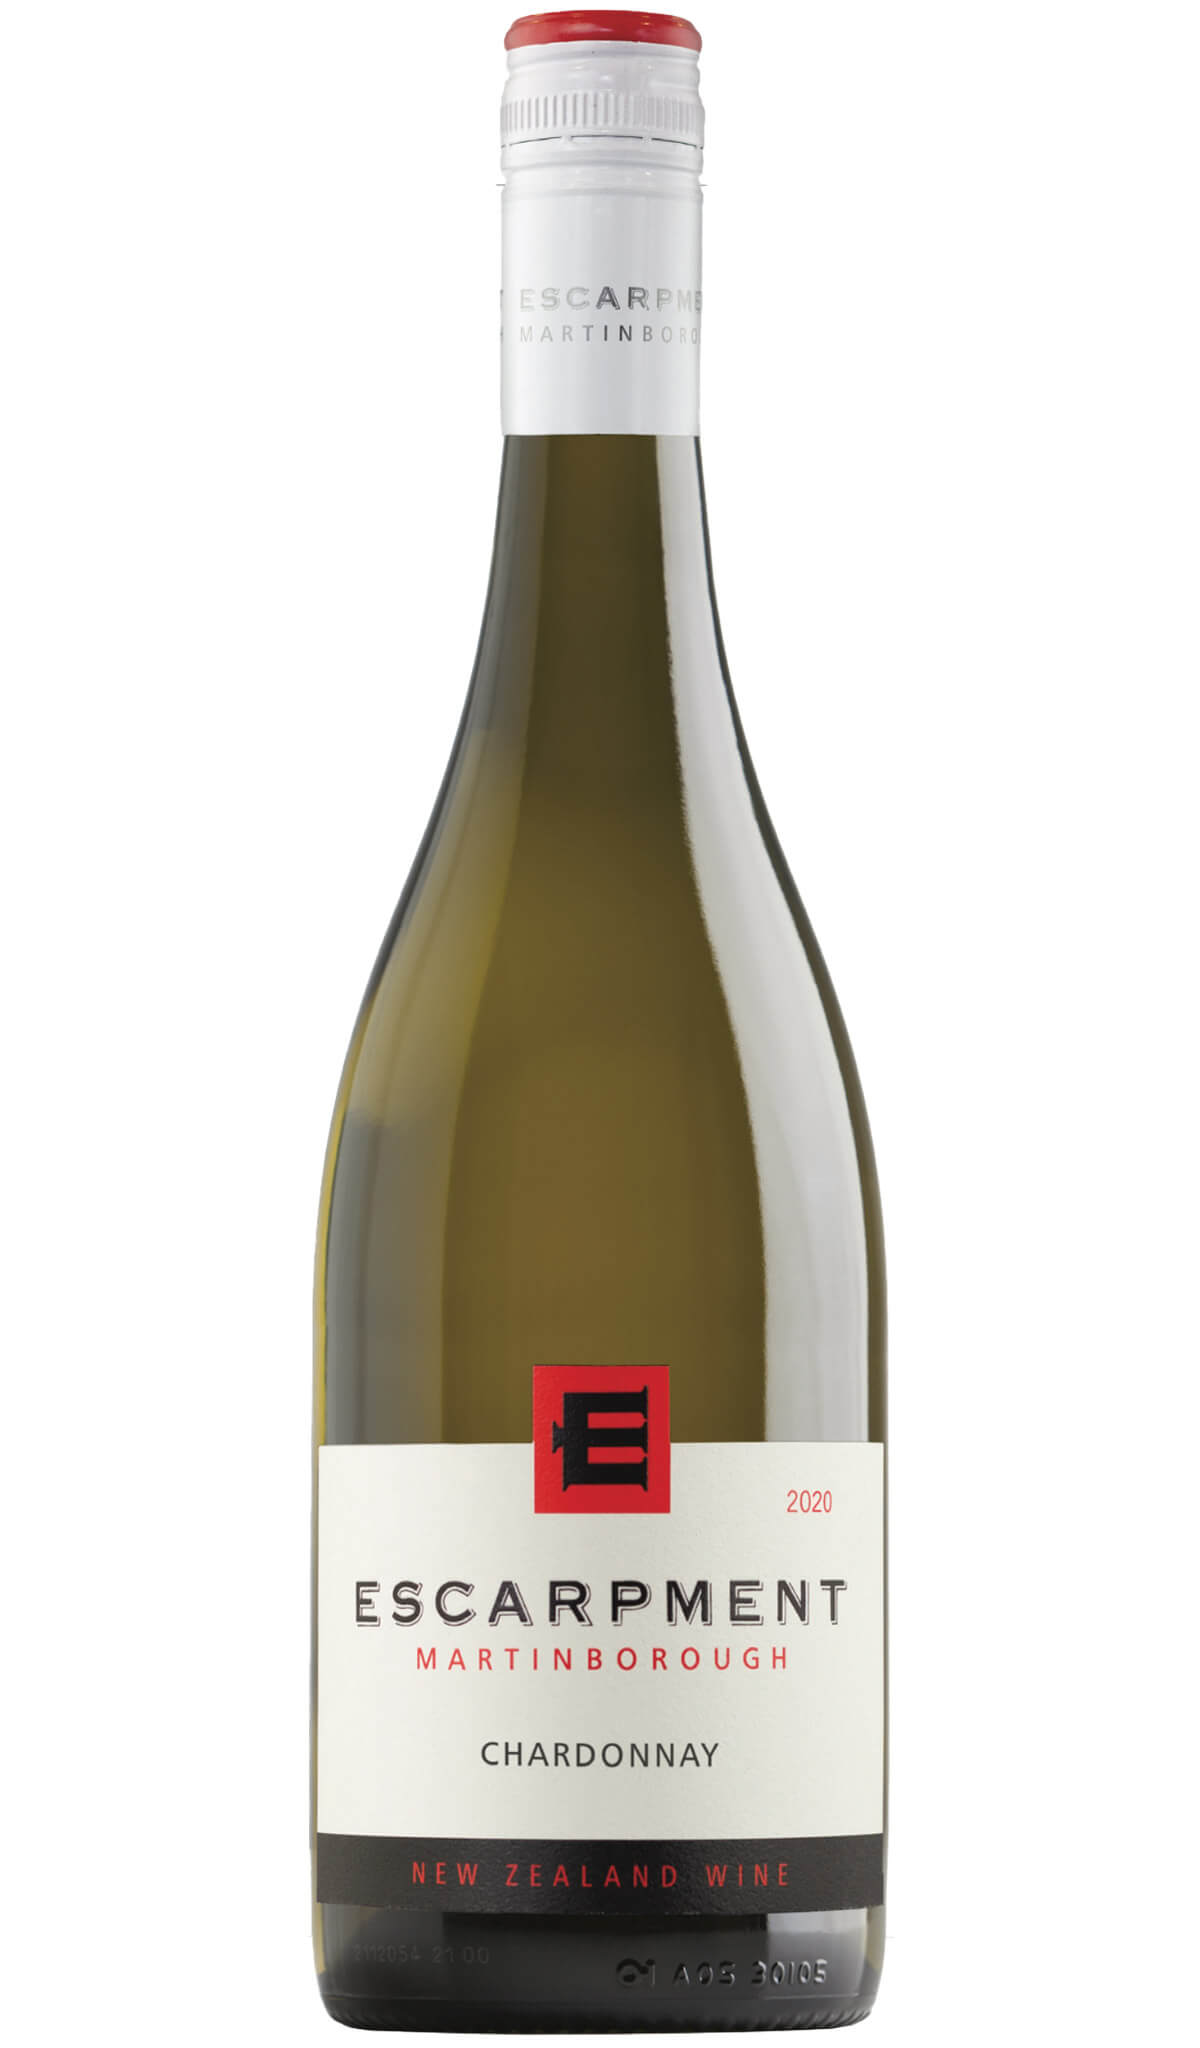 Find out more, explore the range and purchase Escarpment Chardonnay 2020 (Martinborough, New Zealand) available online at Wine Sellers Direct - Australia's independent liquor specialists.